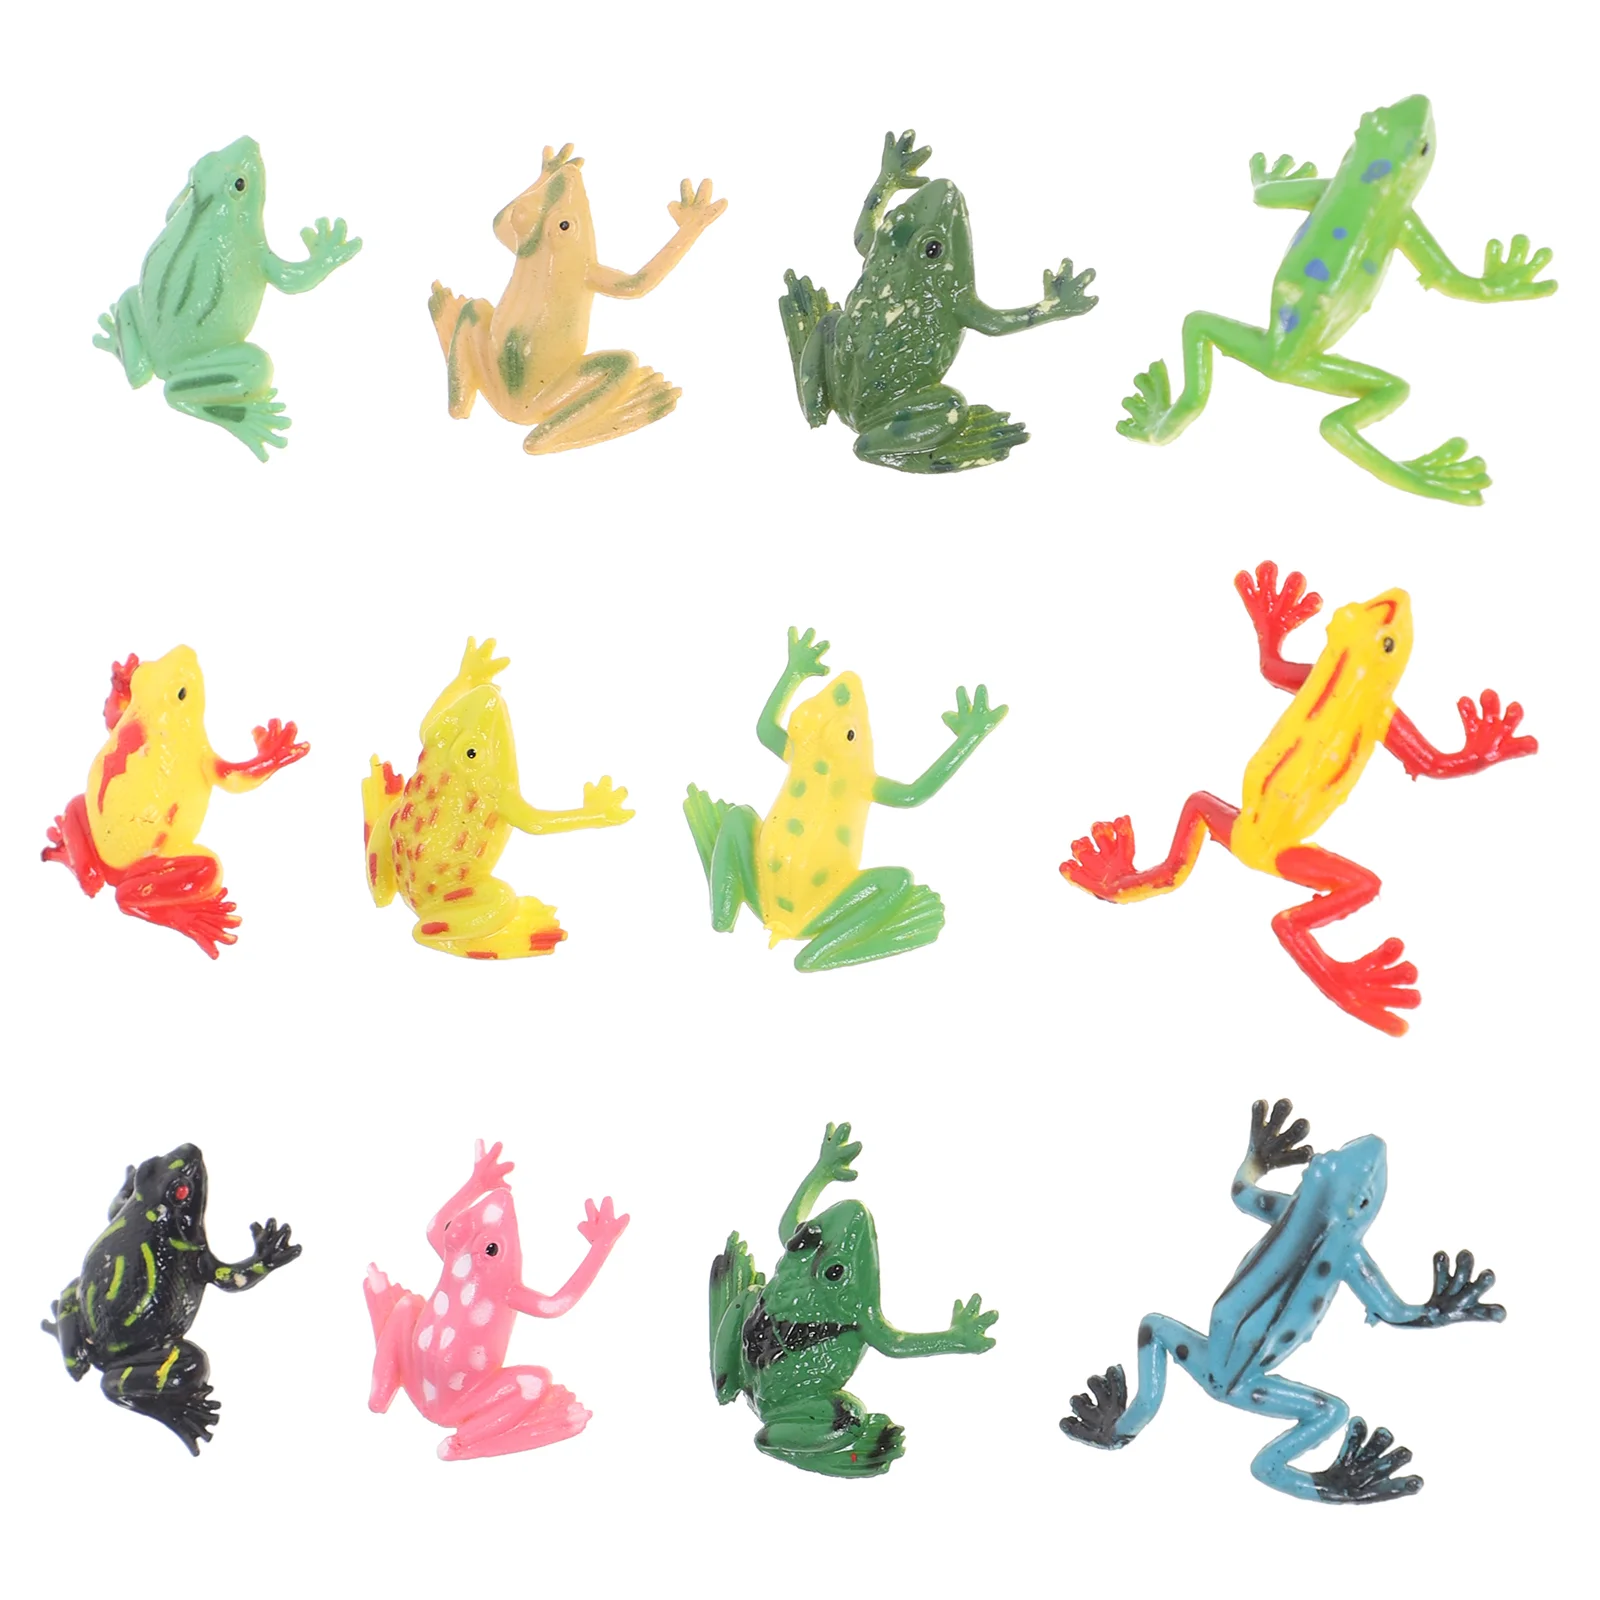 

12 Pcs Bulk Toys Kids Simulated Tropical Tree Frog Frogs Figurines Animal Ornament Decor Model Child